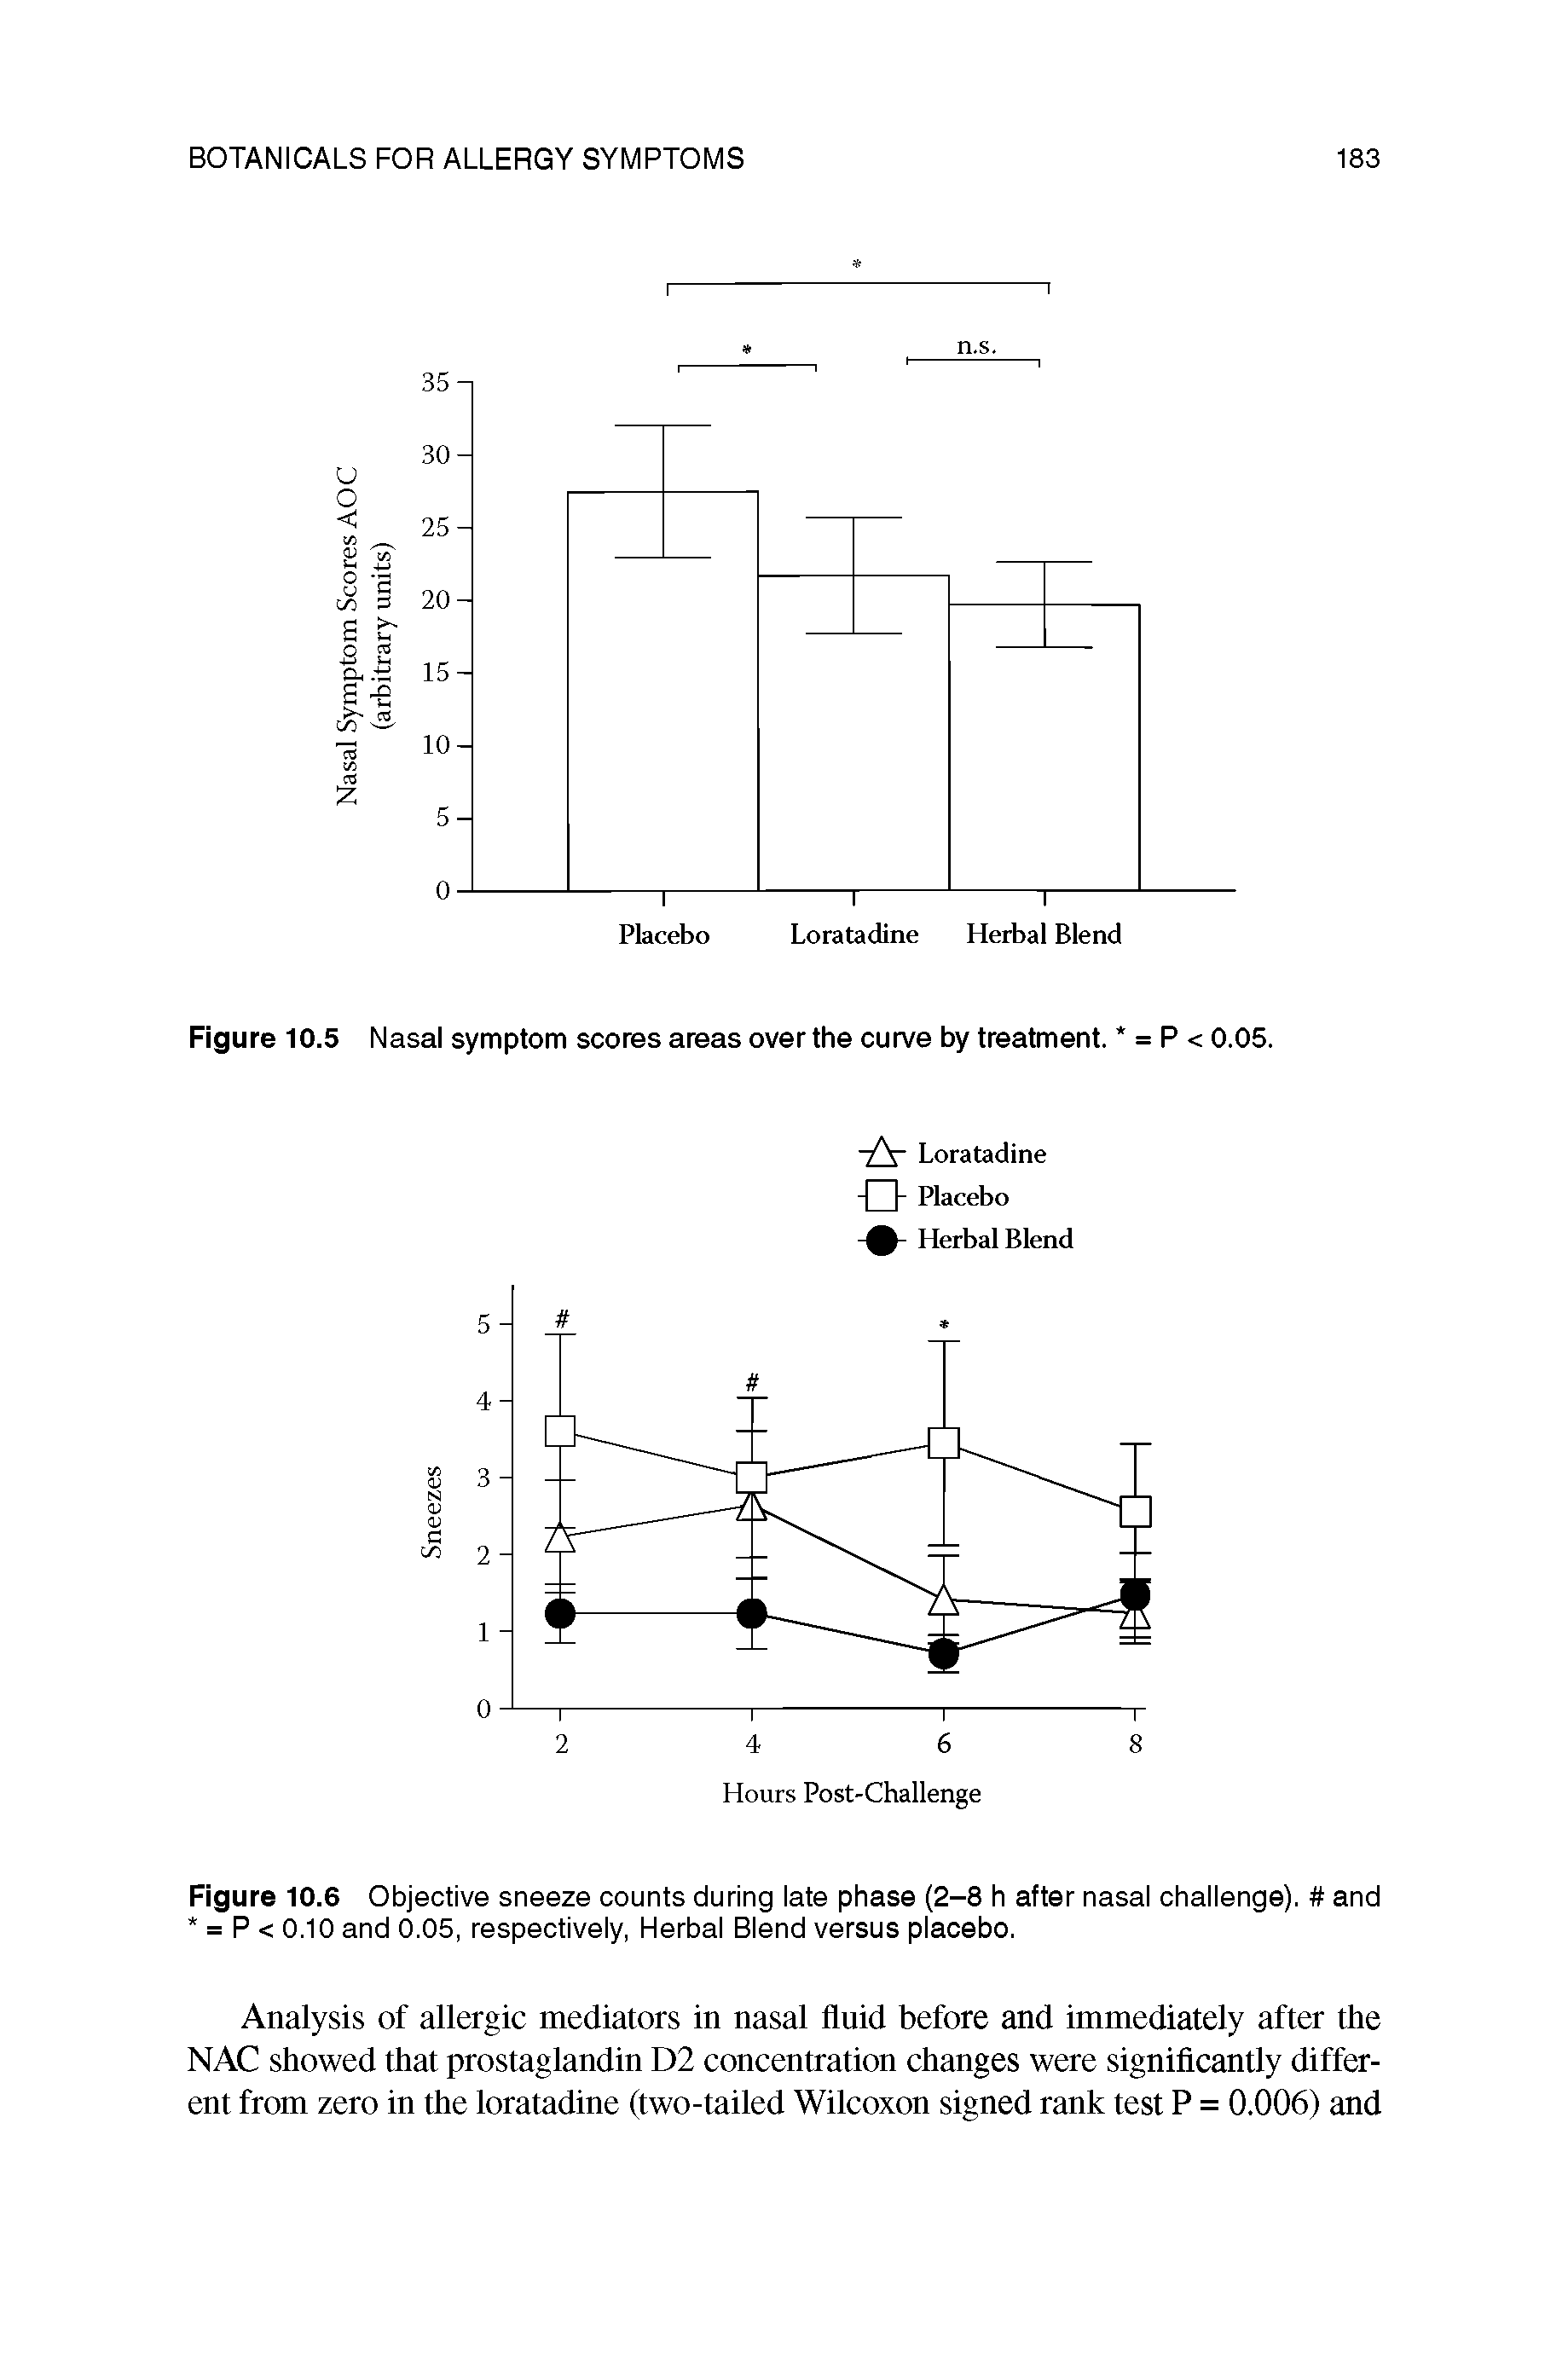 Figure 10.6 Objective sneeze counts during late phase (2-8 h after nasal challenge). and = P < 0.10 and 0.05, respectively, Herbal Blend versus placebo.